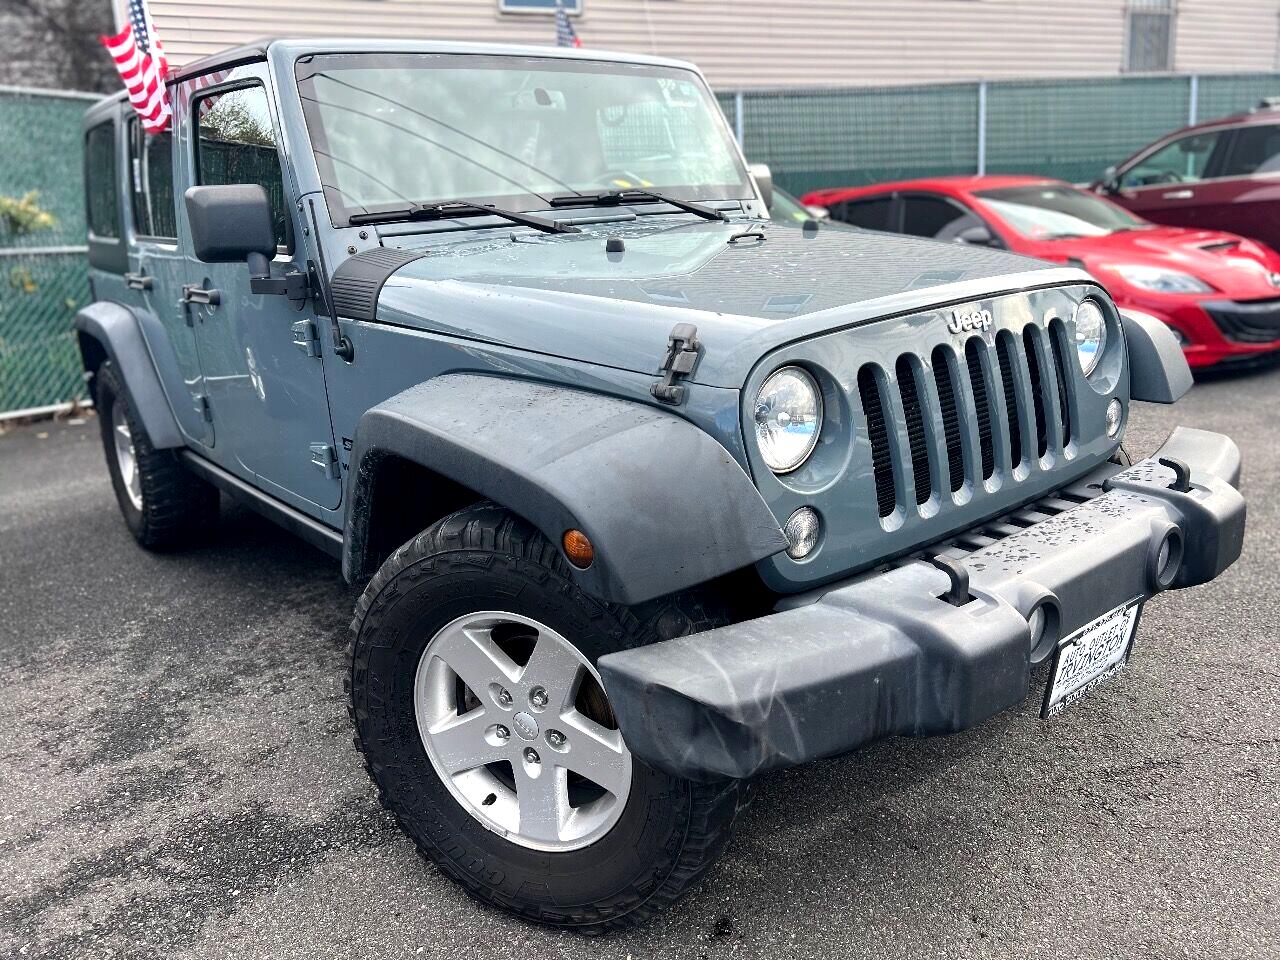 Used Jeep Wrangler For Sale in Levittown, PA Below $5,000 from $499 to  $3,799,900